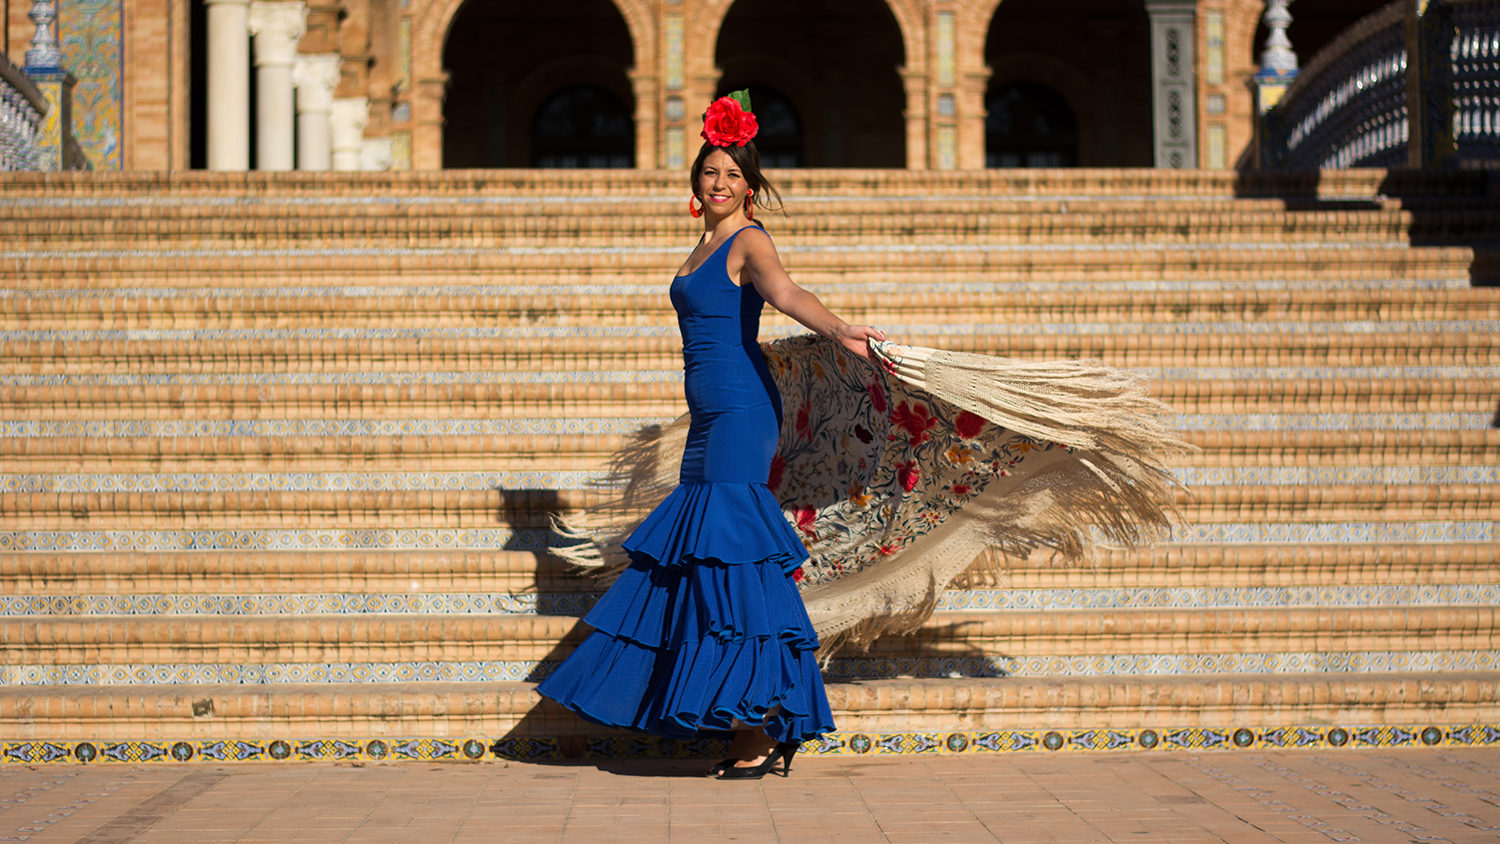 A vibrant flamenco dancer in a flowing blue dress whirls and twirls on sun-drenched steps in Seville, Spain, epitomizing the grace and passion of traditional Andalusian dance.